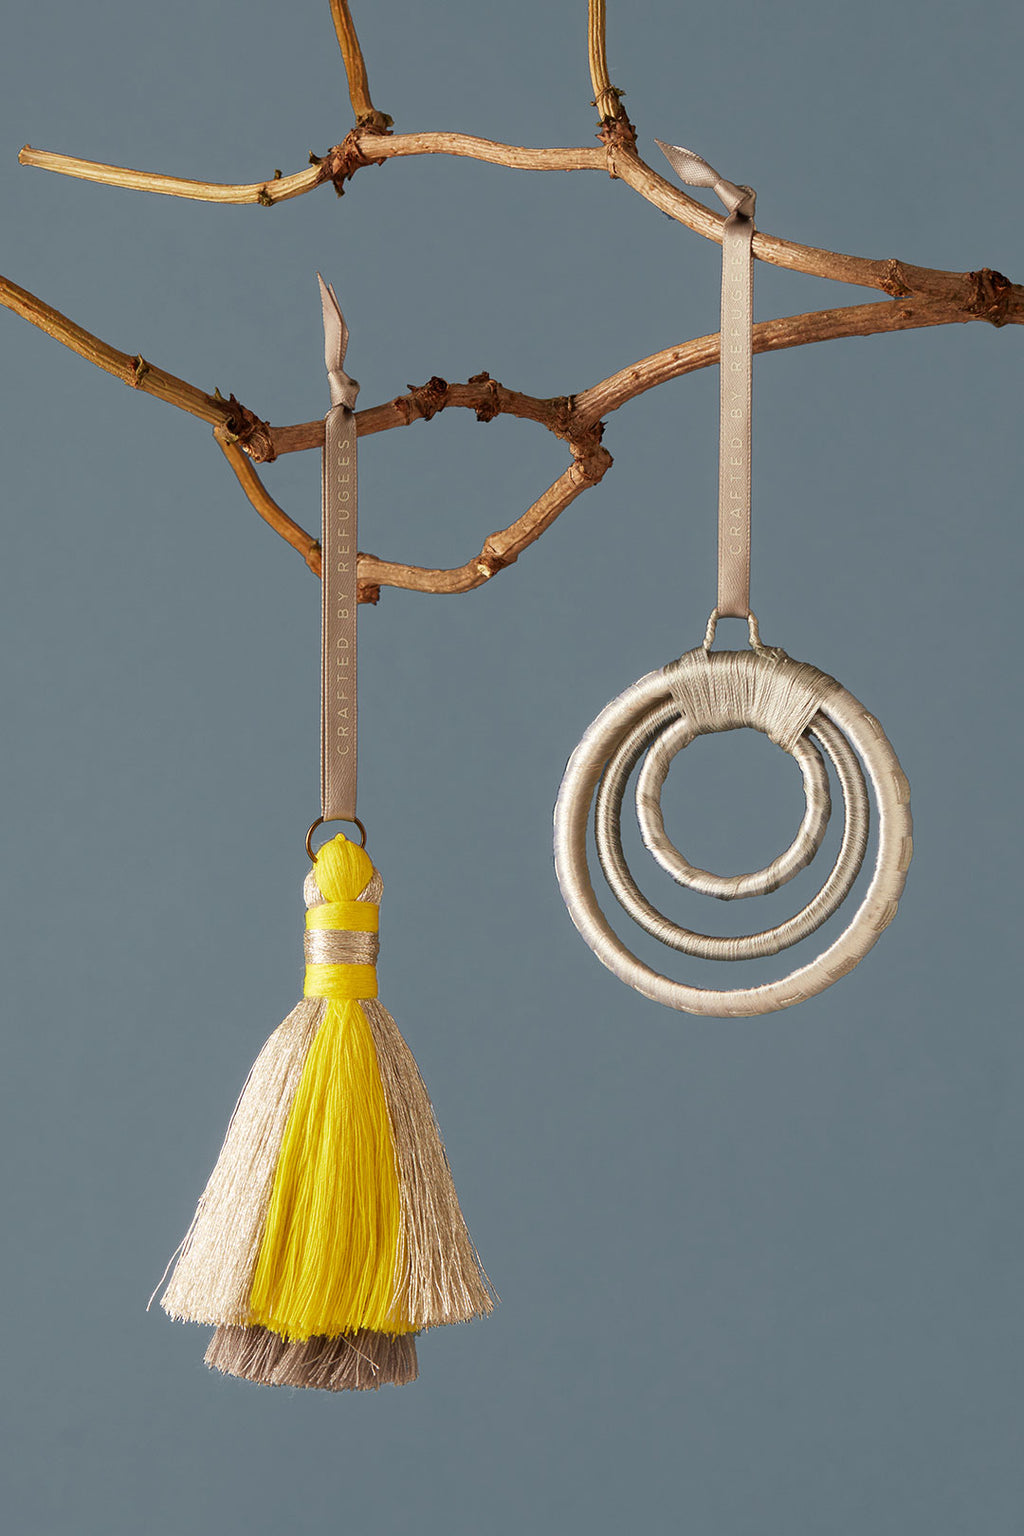 MADE51 Dancing Tassel Ornament, Crafted by Rohingya Refugees in Malaysia